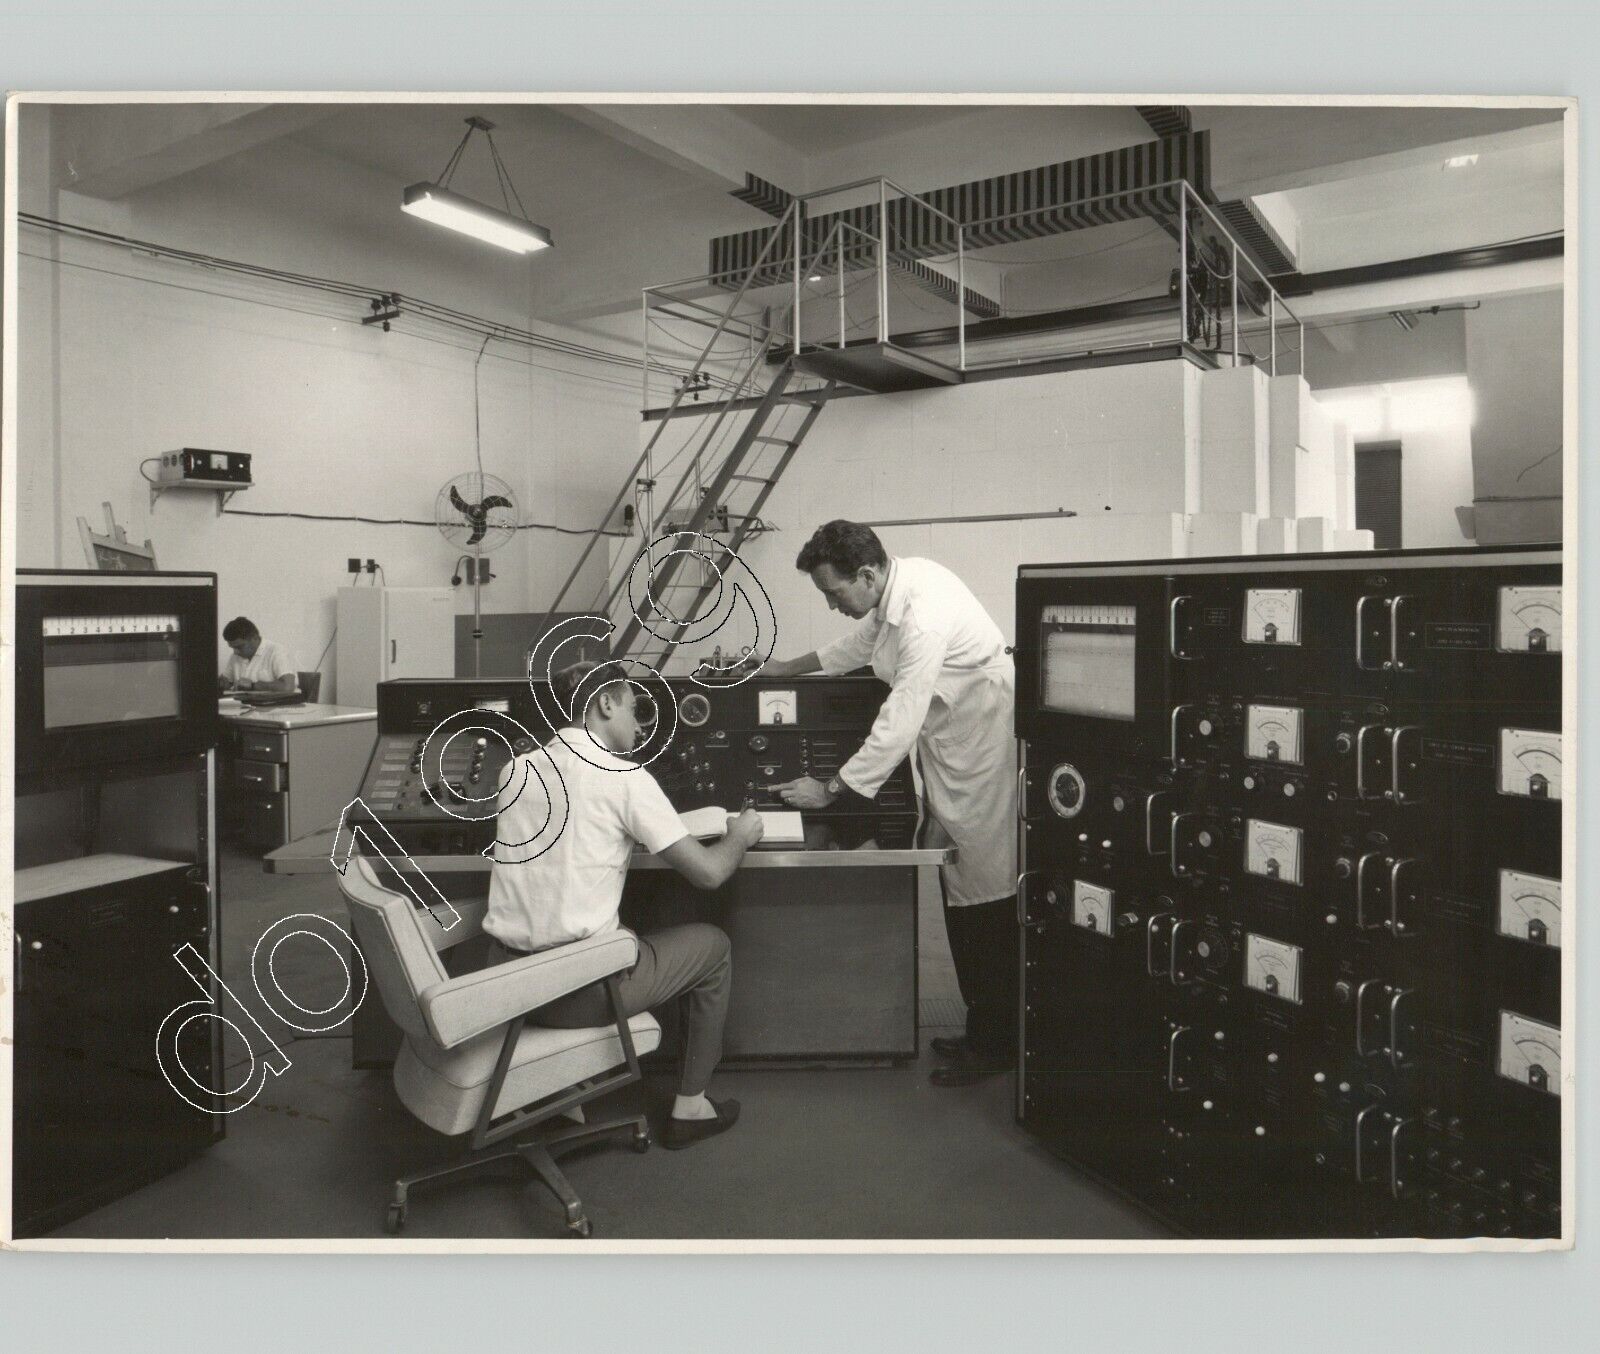 Two Scientists @ NUCLEAR REACTOR In RIO DE JANEIRO, BRAZIL 20th Cent Press Photo